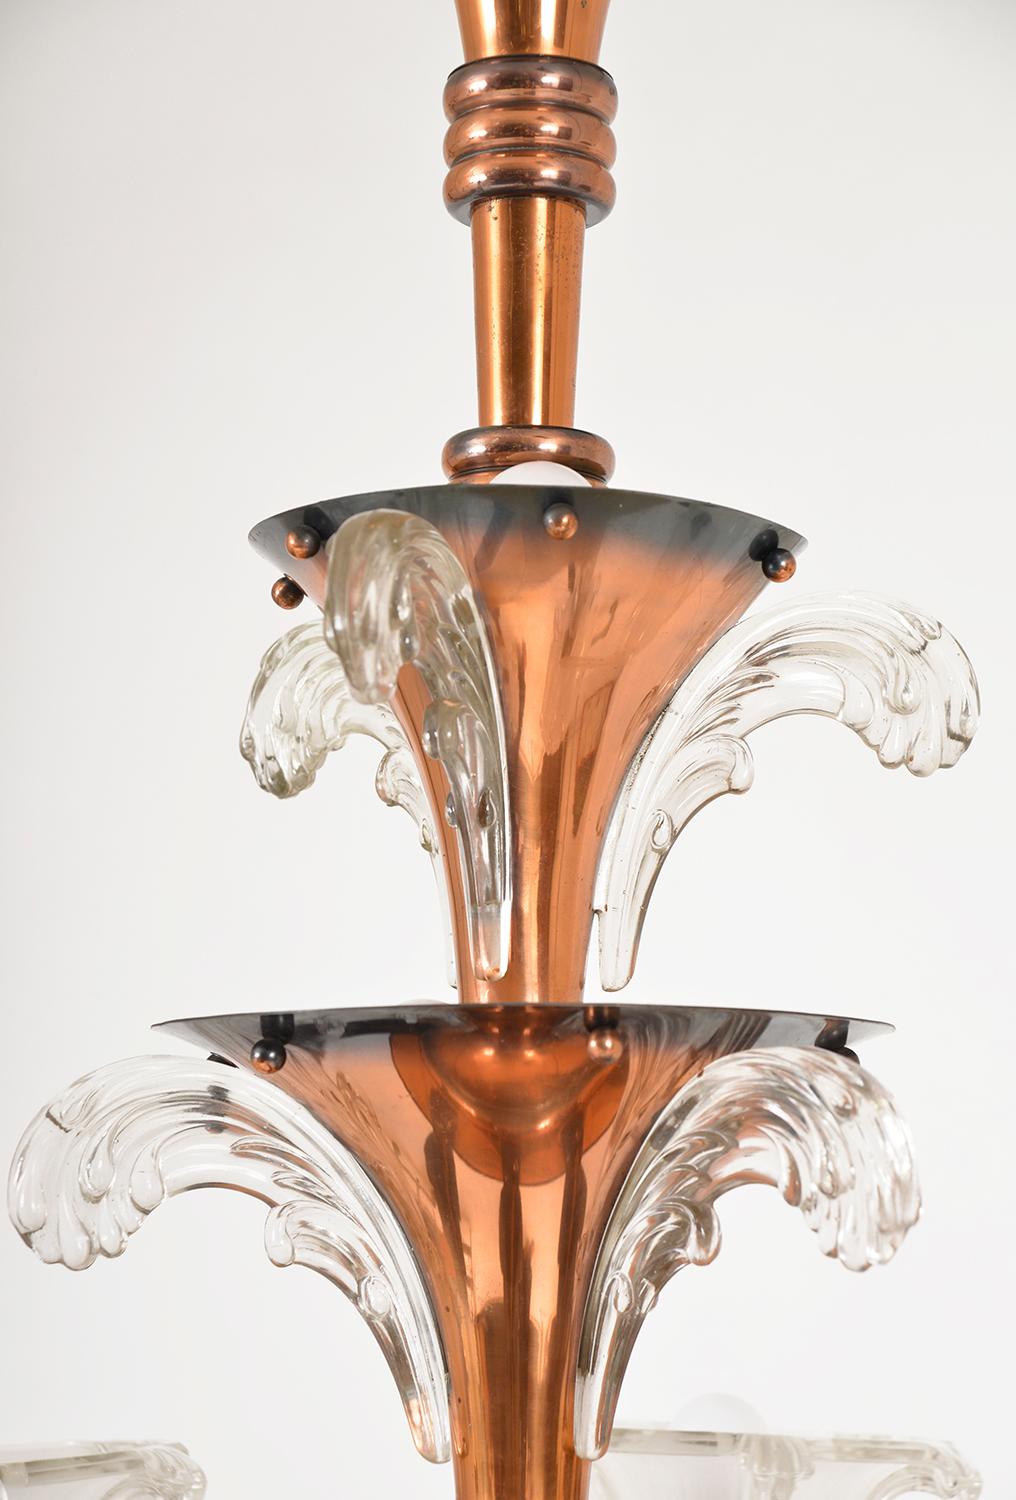 1930s French Art Deco 6-Arm Chandelier by Petitot and Ezan Copper and Glass For Sale 1